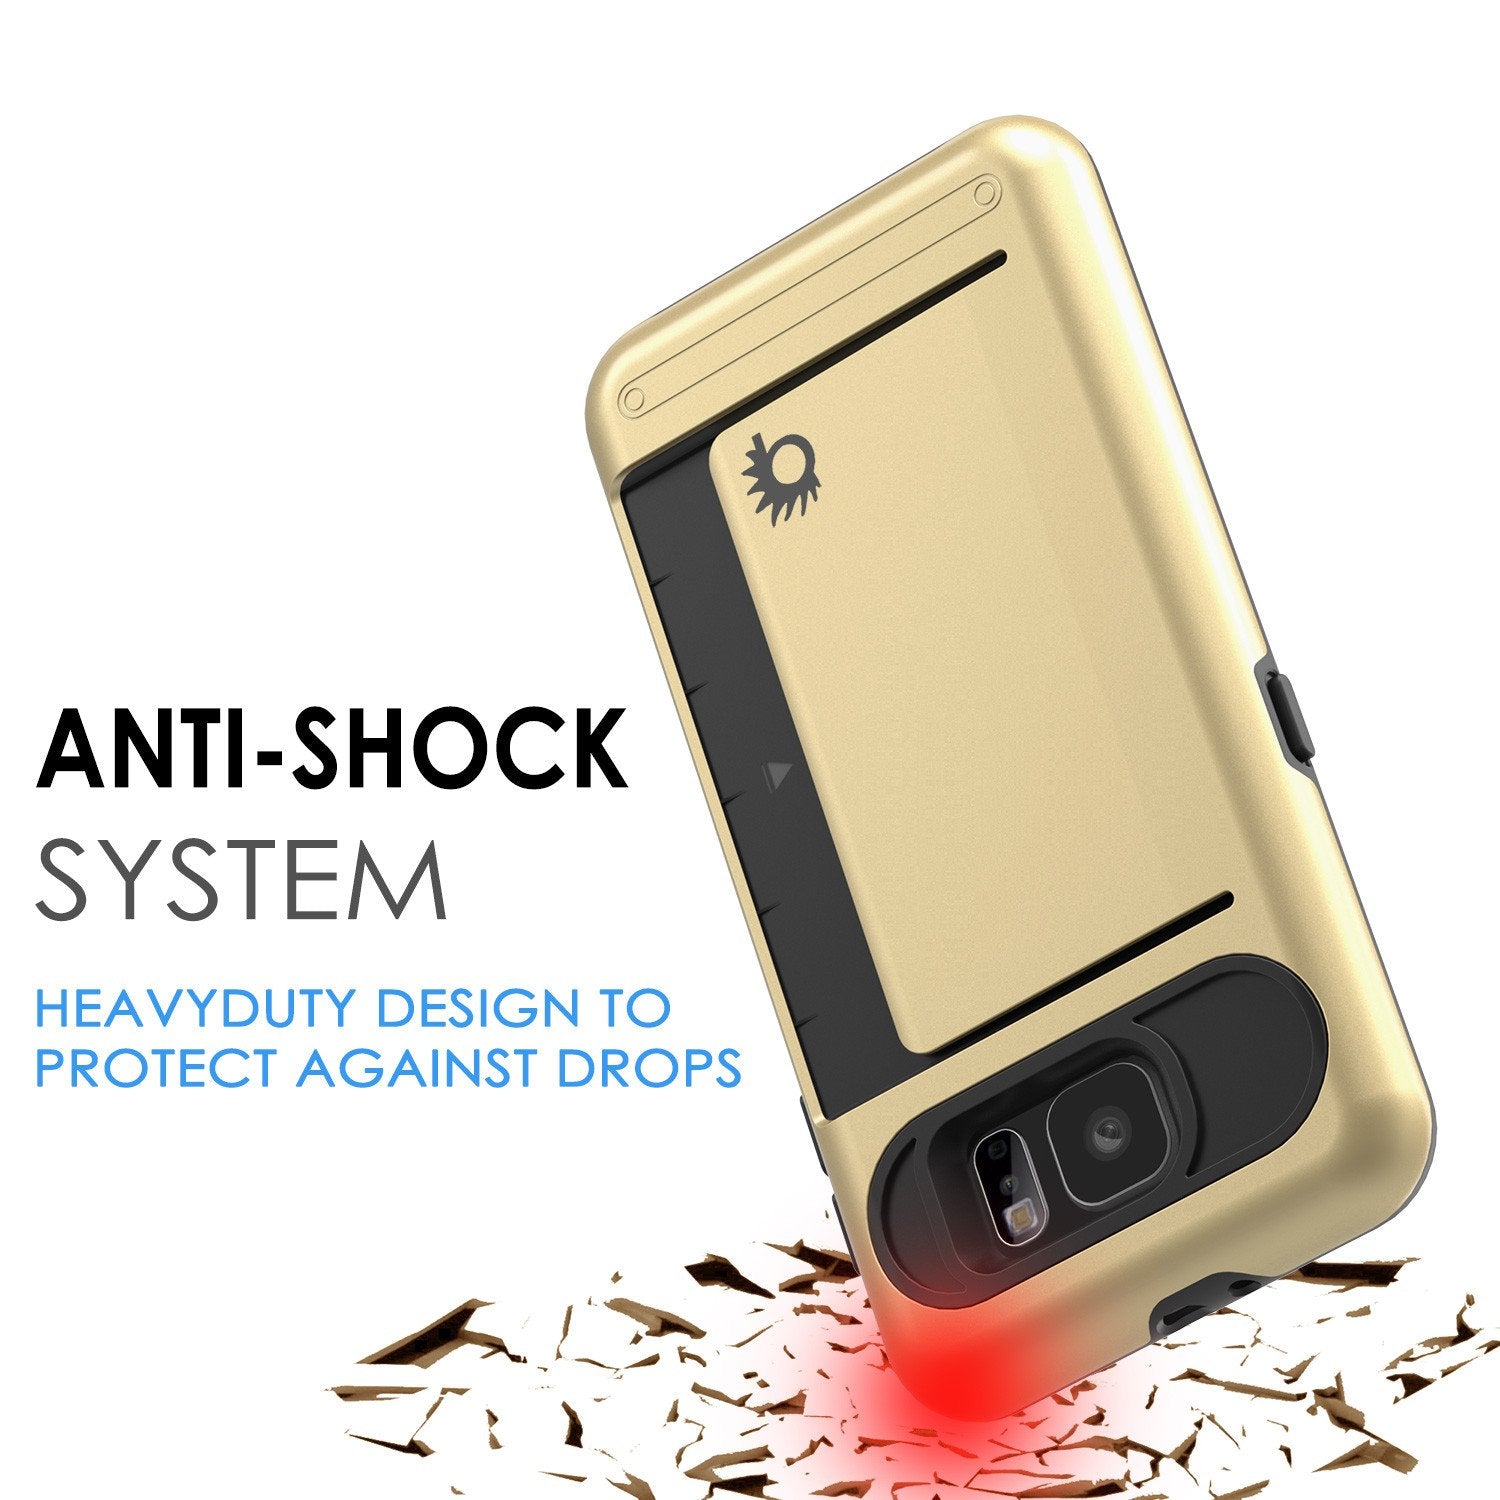 Galaxy s6 Case PunkCase CLUTCH Gold Series Slim Armor Soft Cover Case w/ Tempered Glass